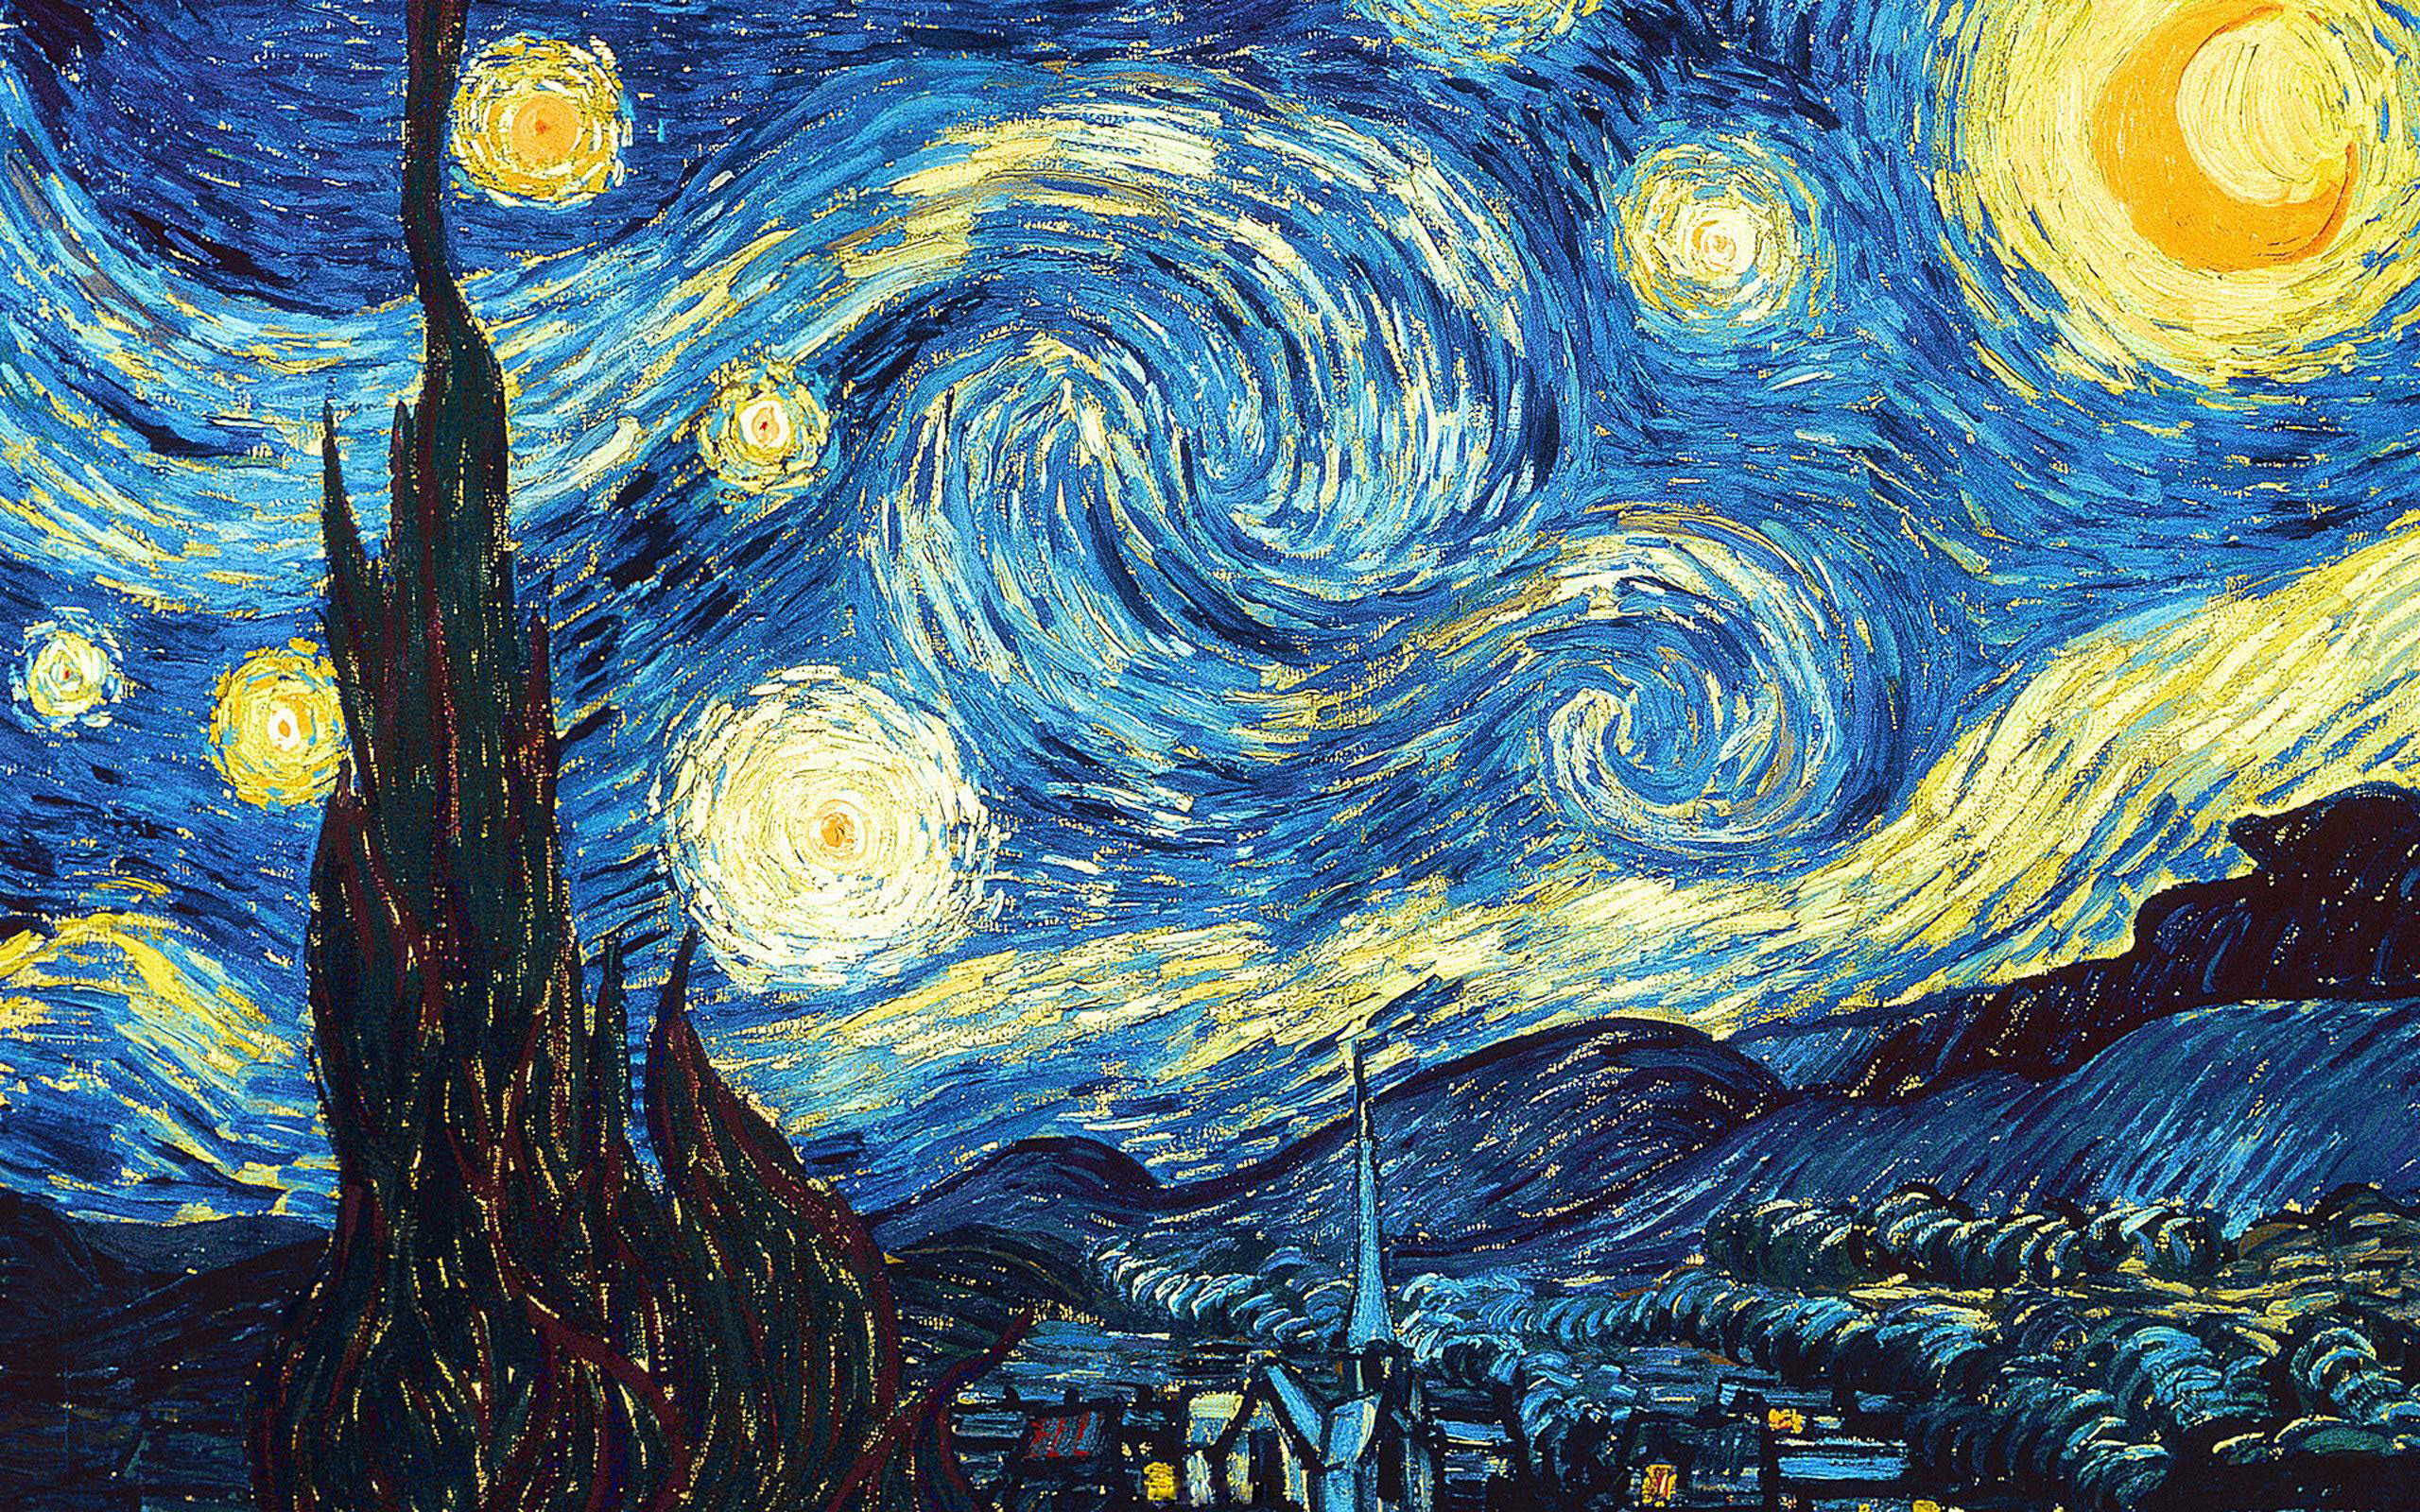 2560x1600 The painting, The Starry Night, van Gogh Wallpaper